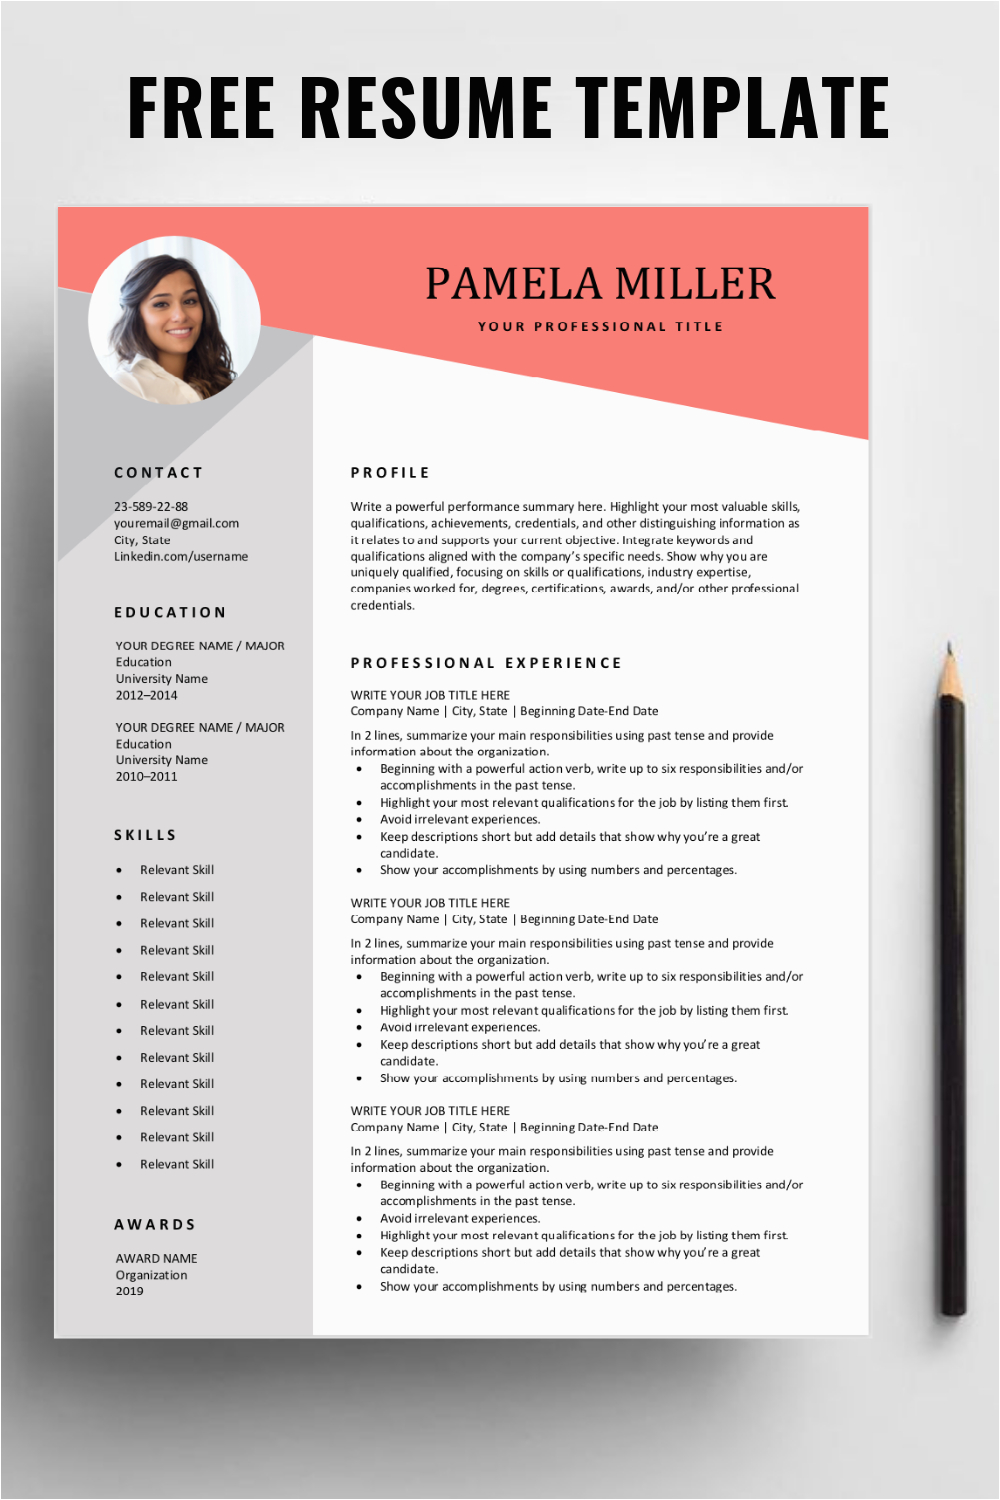 Professional Resume Design Templates Free Download Free Resume Template